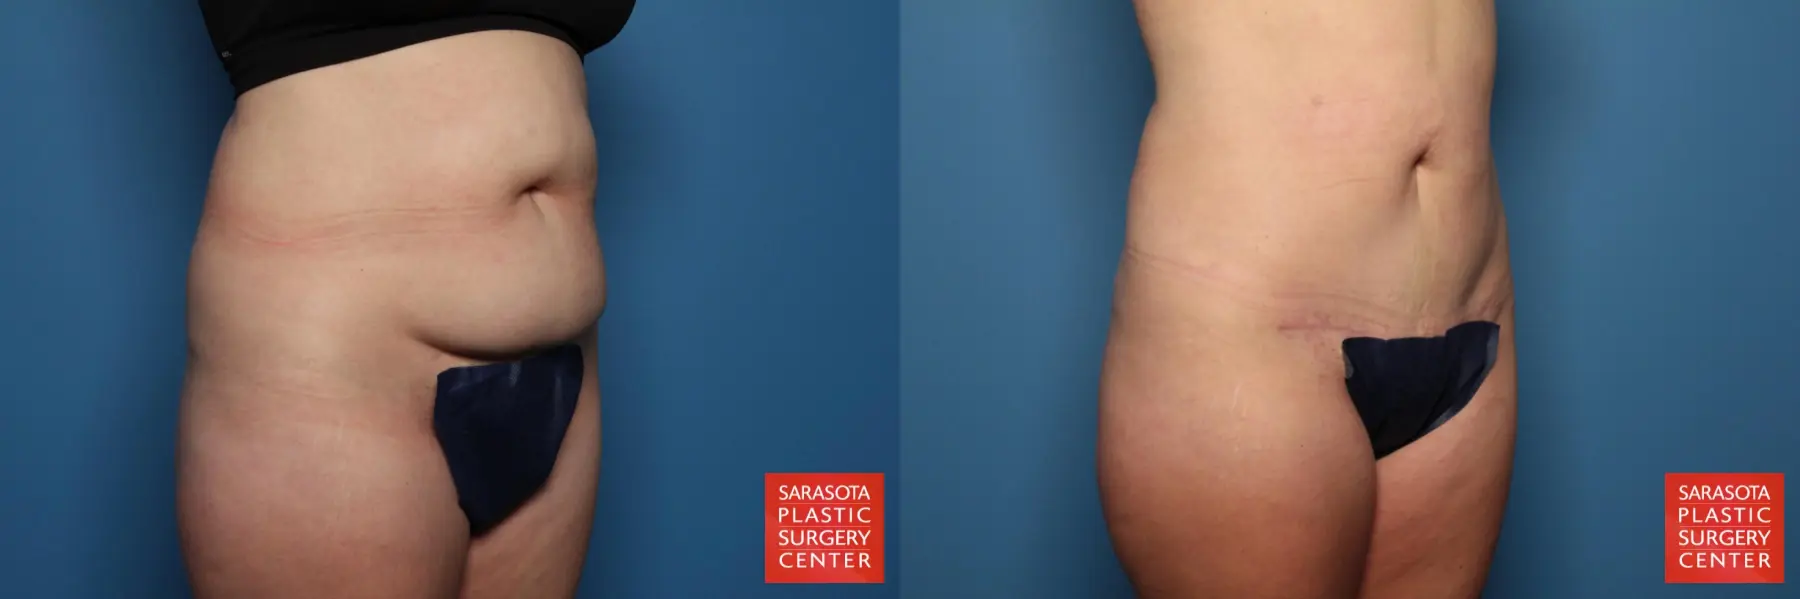 Mini Tummy Tuck: Patient 3 - Before and After 2